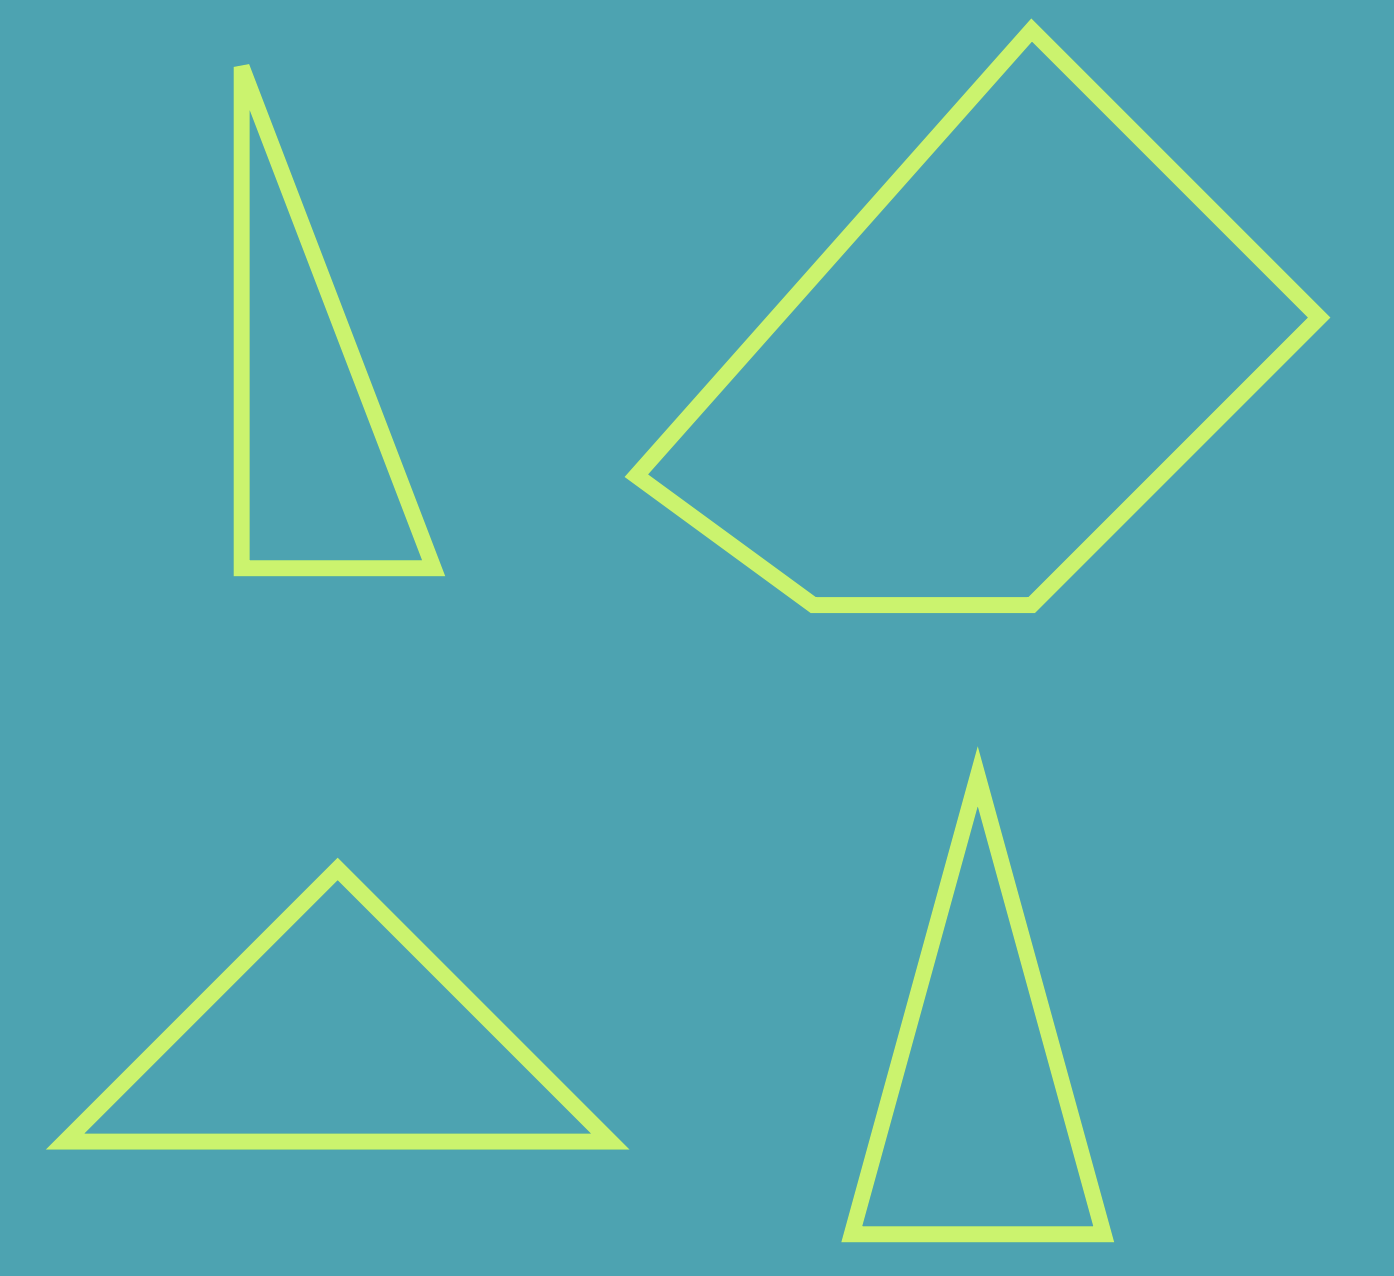 A picture of 4 shapes (3 triangles, 2 triangles with a right angle, 2 isosceles triangles, 1 pentagon)